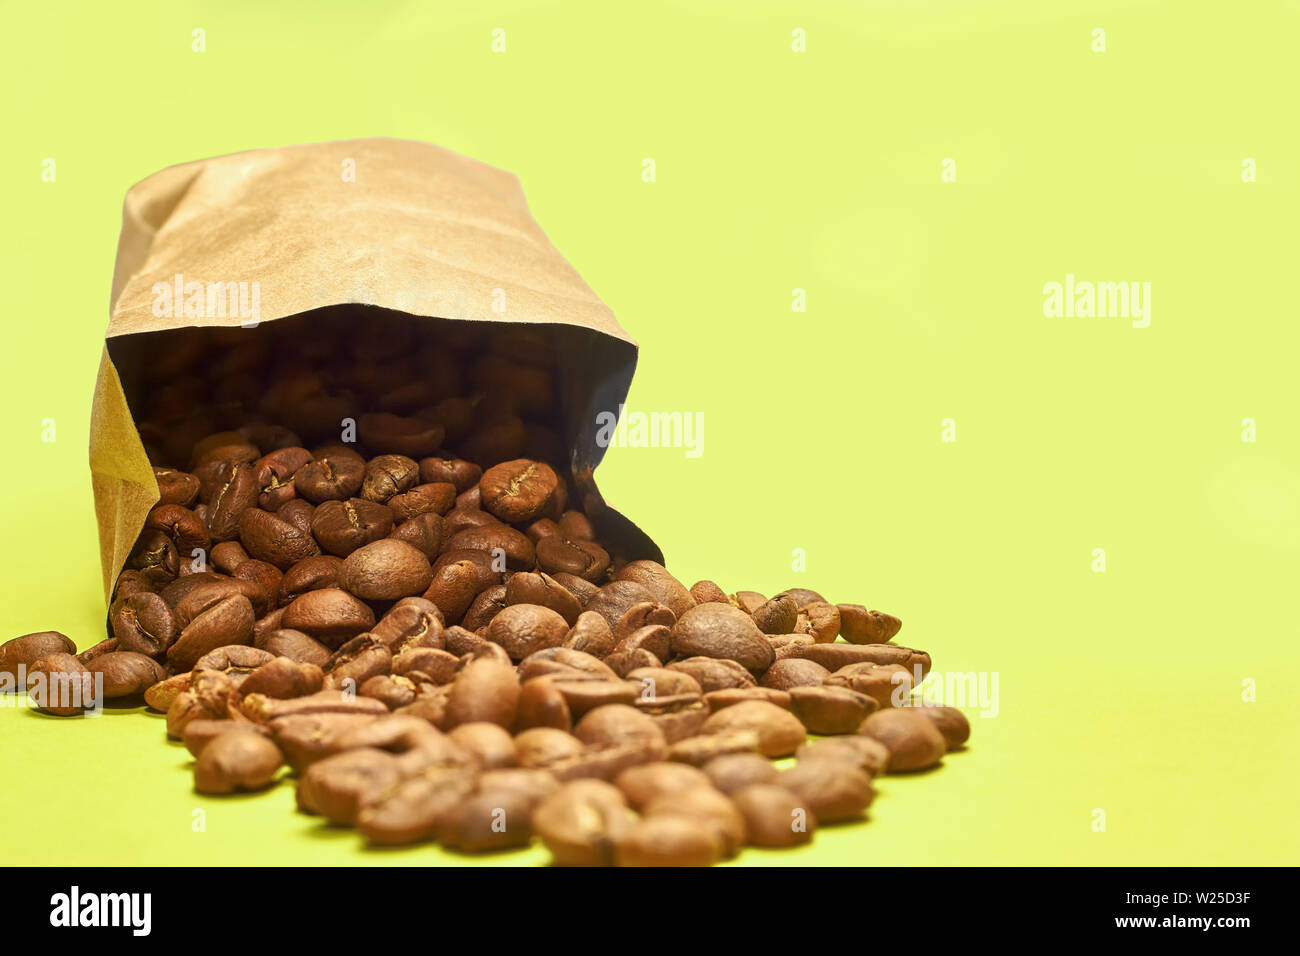 Download Coffee Beans From A Paper Bag Isolated On A Yellow Background Stock Photo Alamy Yellowimages Mockups